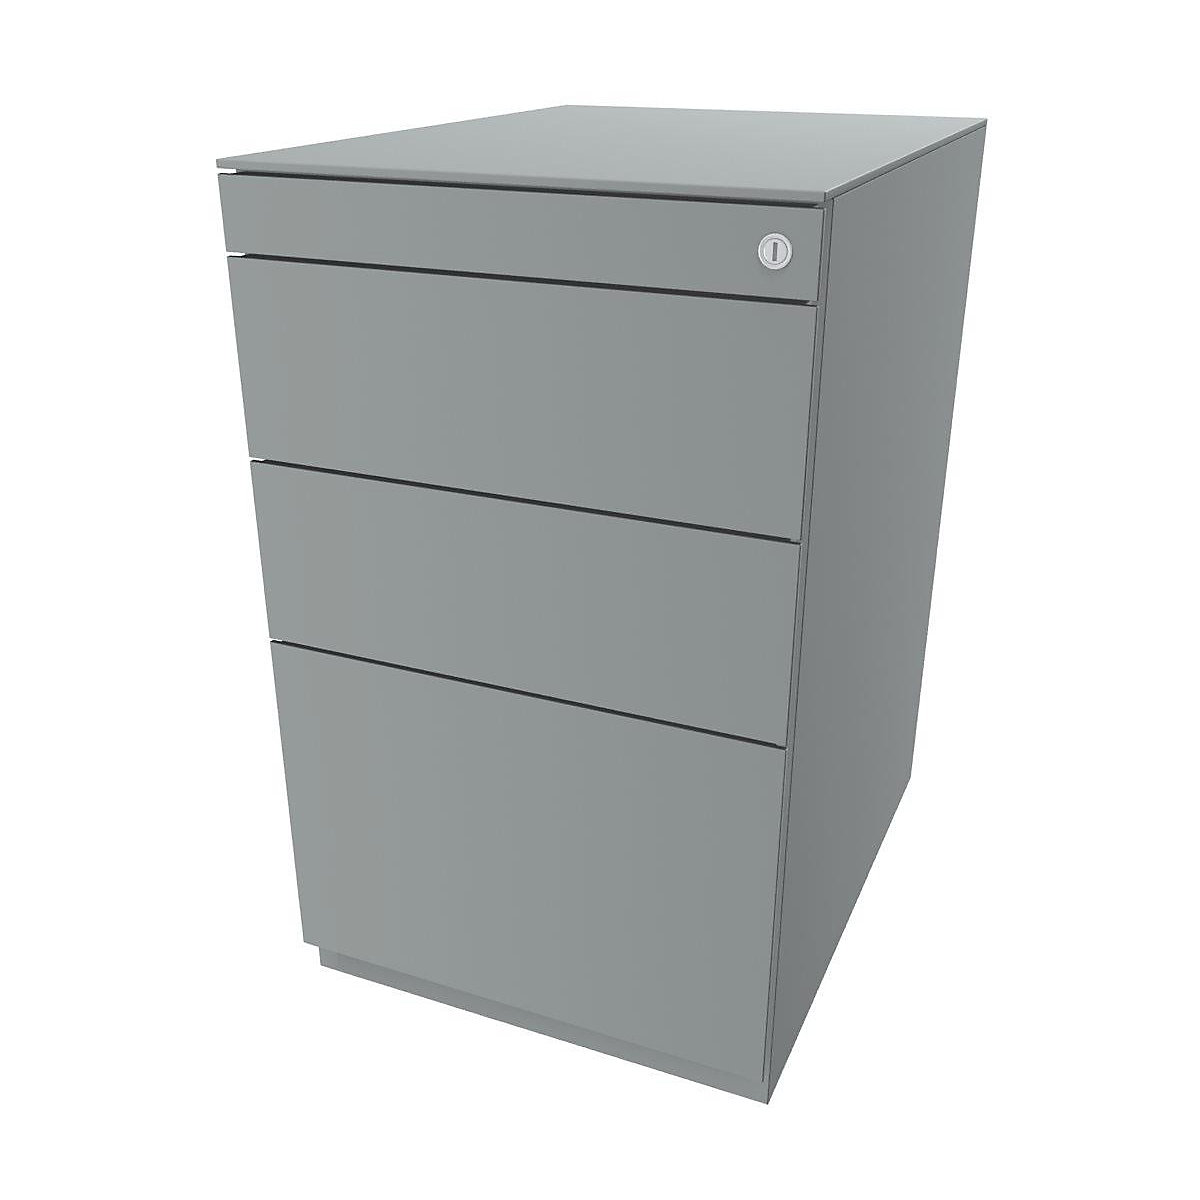 Note™ fixed pedestal, with 2 universal drawers, 1 suspension file drawer – BISLEY, with top, depth 565 mm, silver-5